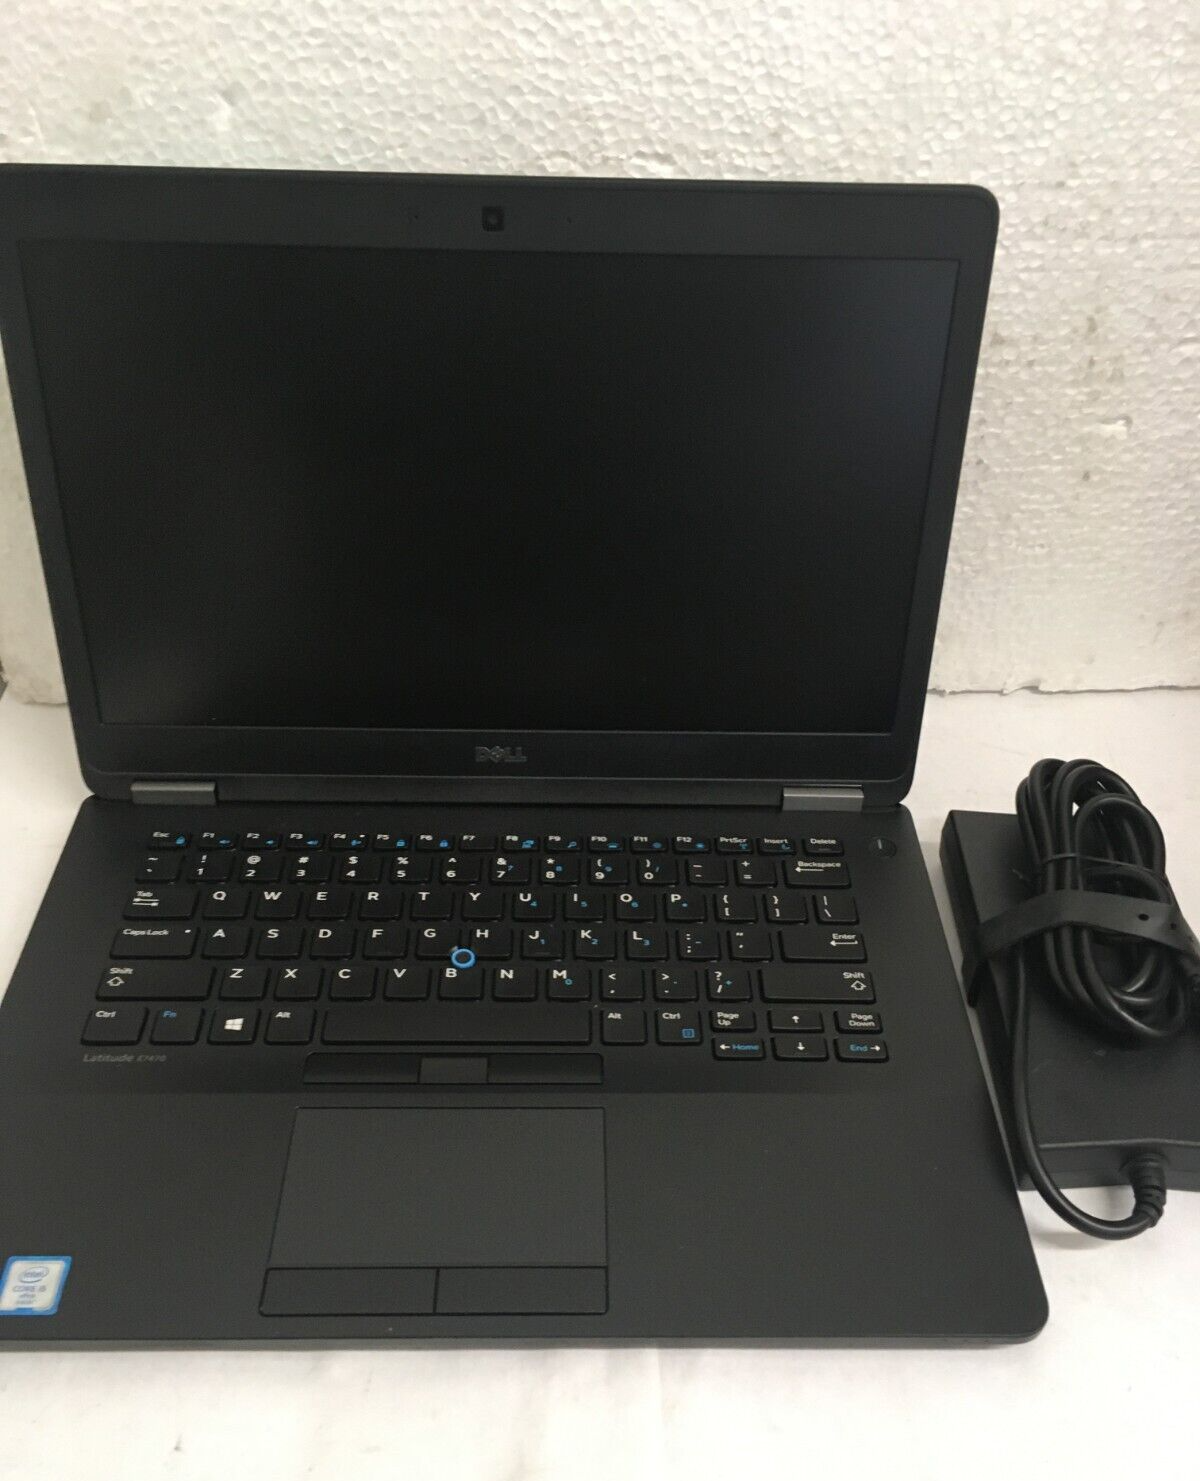 DELL Latitude E7470 i5-6300U 14" good functional working laptop with power cord - $193.41